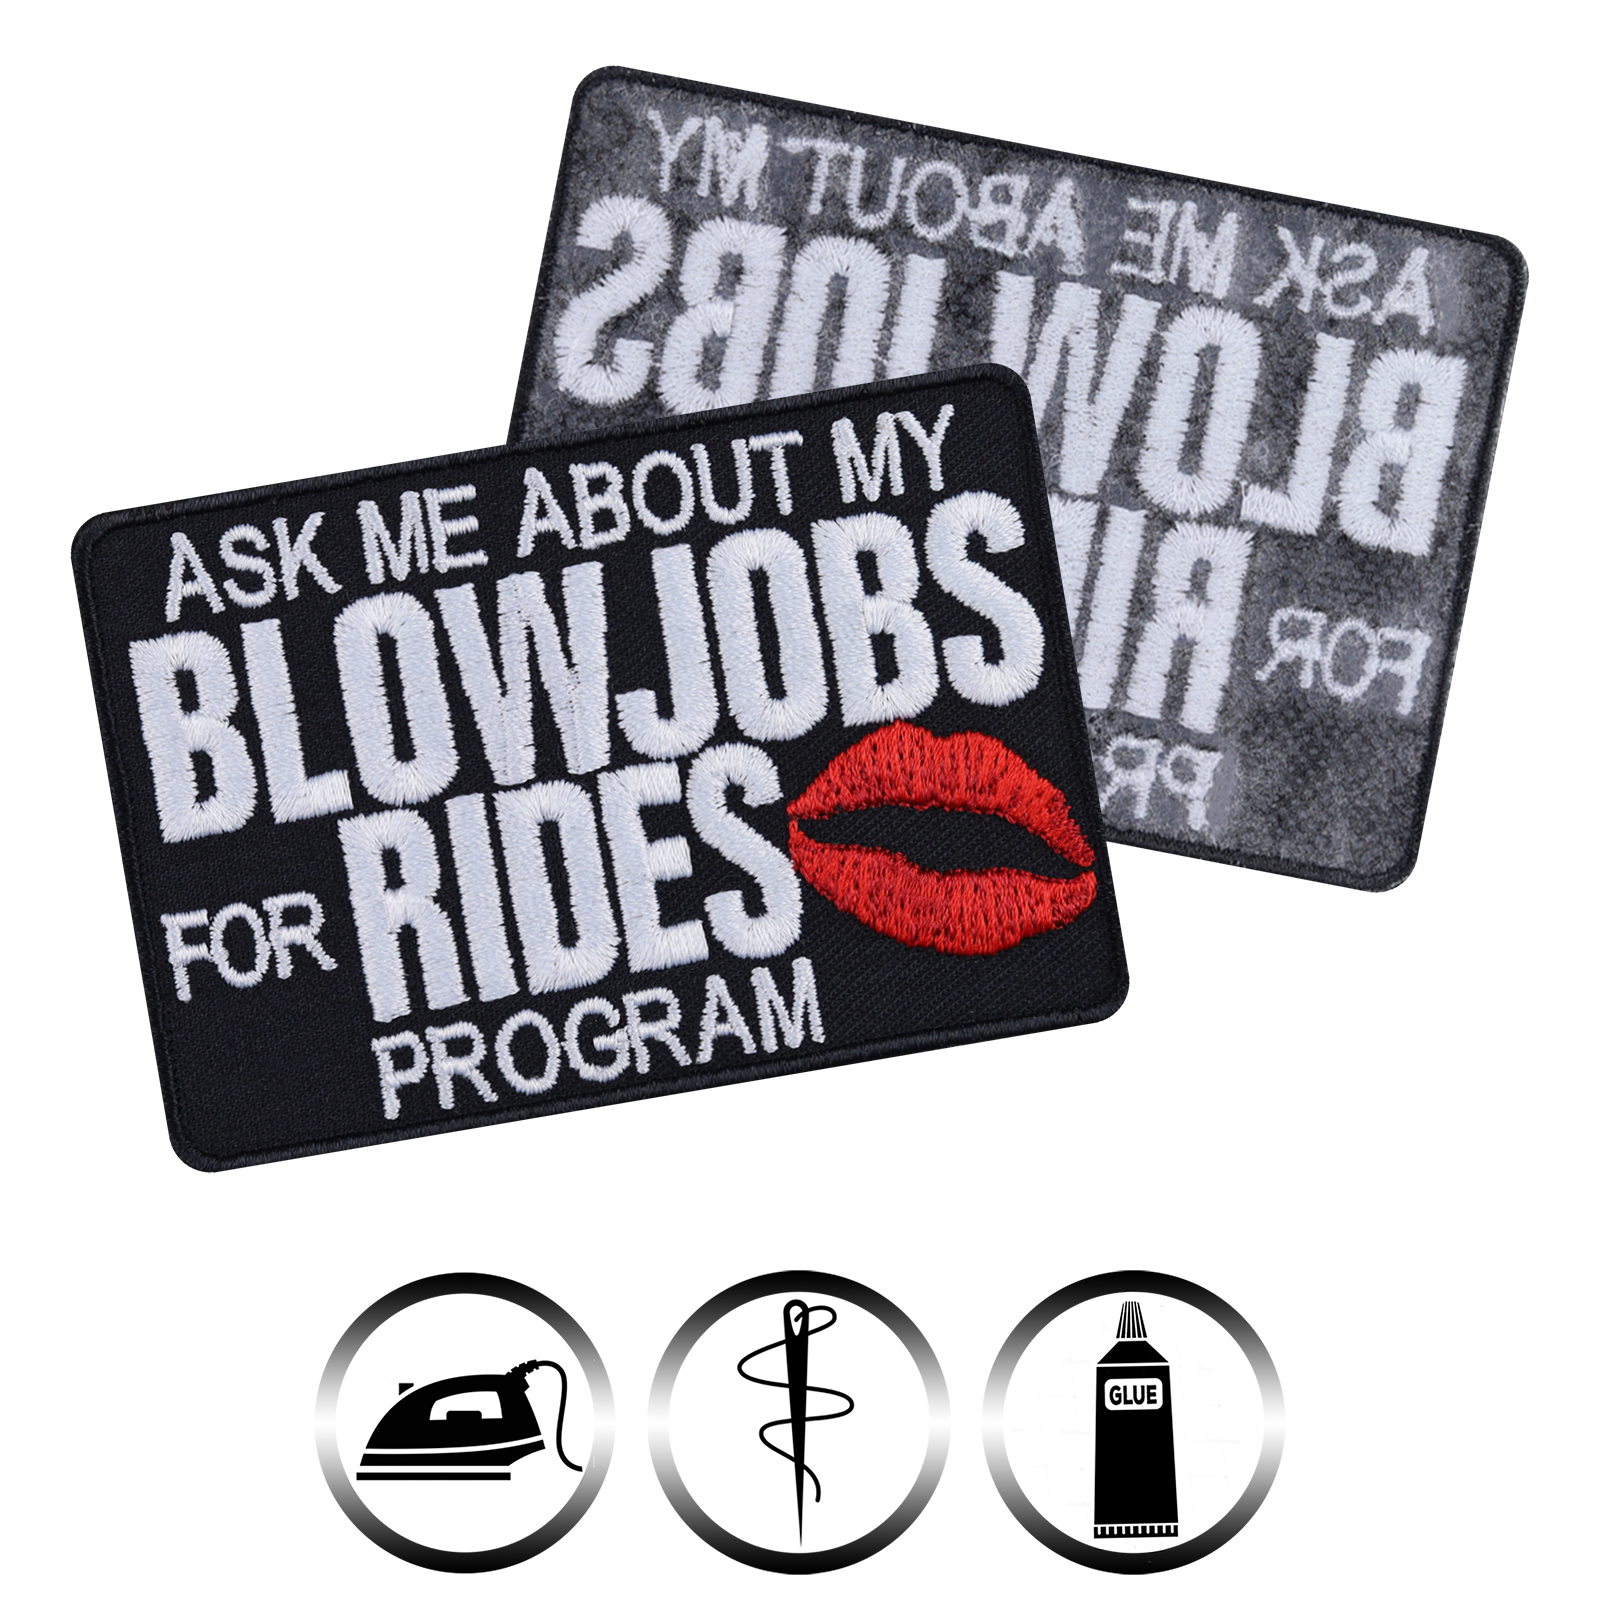 Ask me about my blowjobs for rides program - Patch